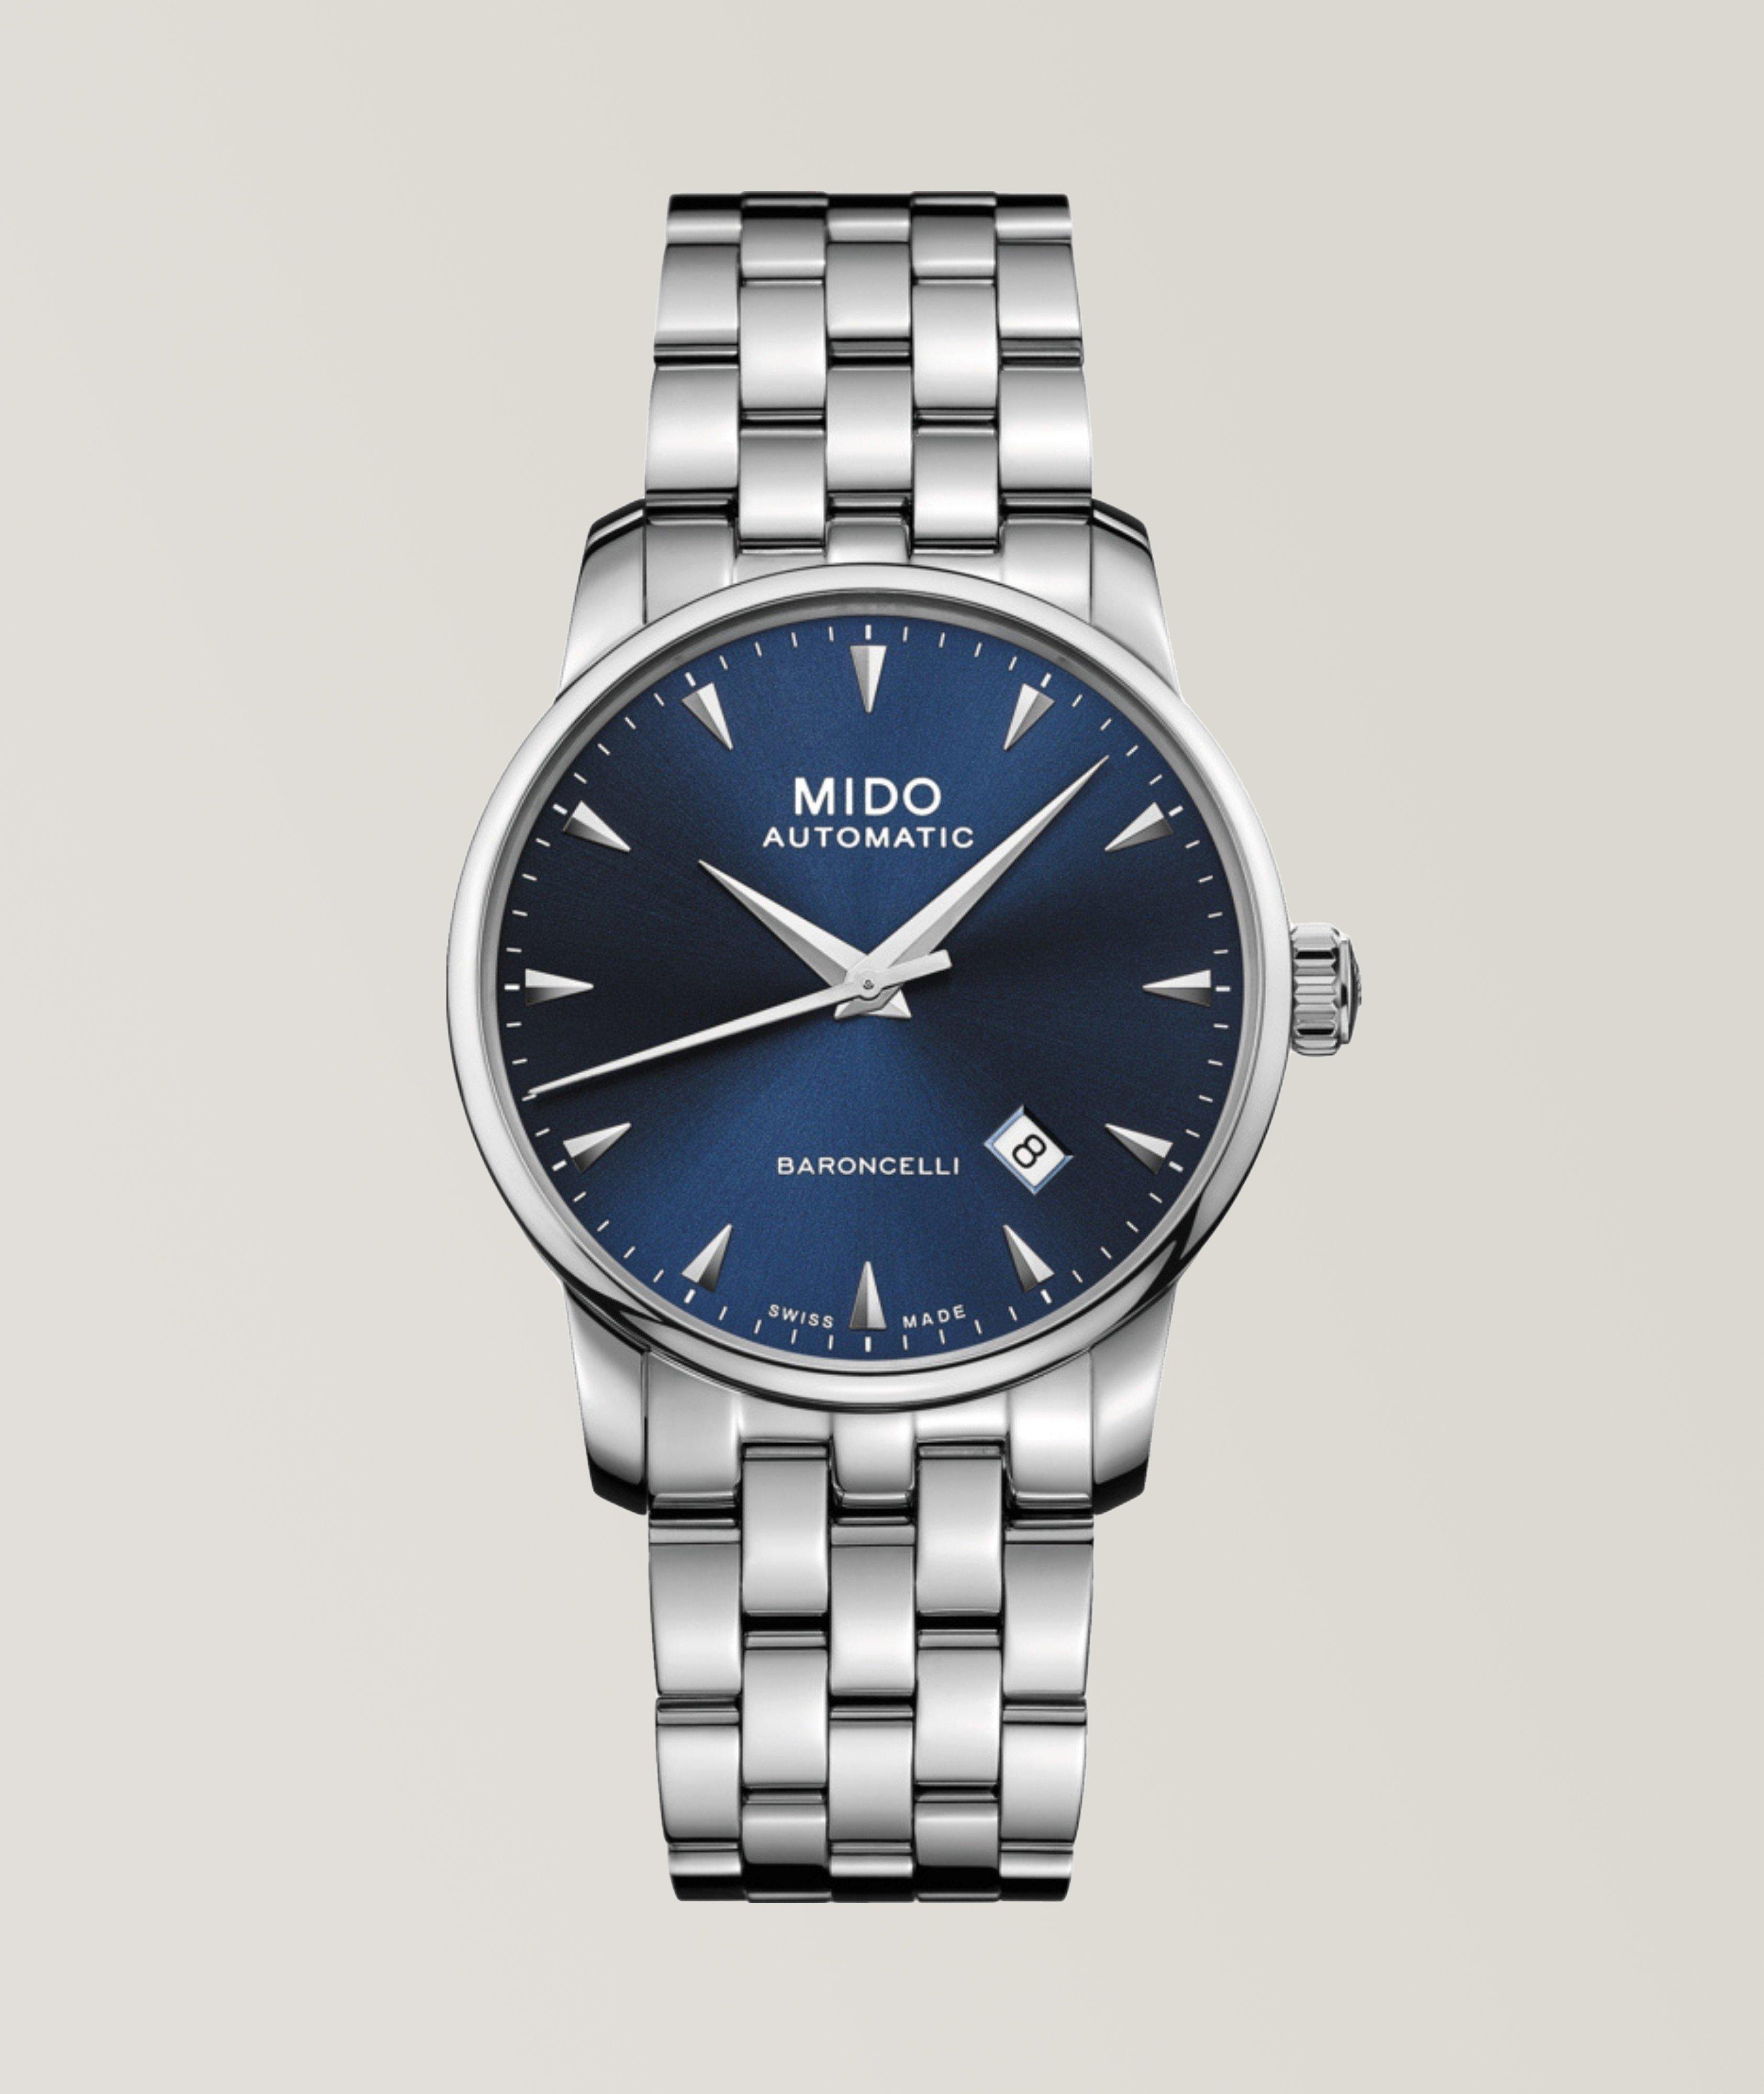 Montre Midnight Blue Gent, collection Baroncelli image 0